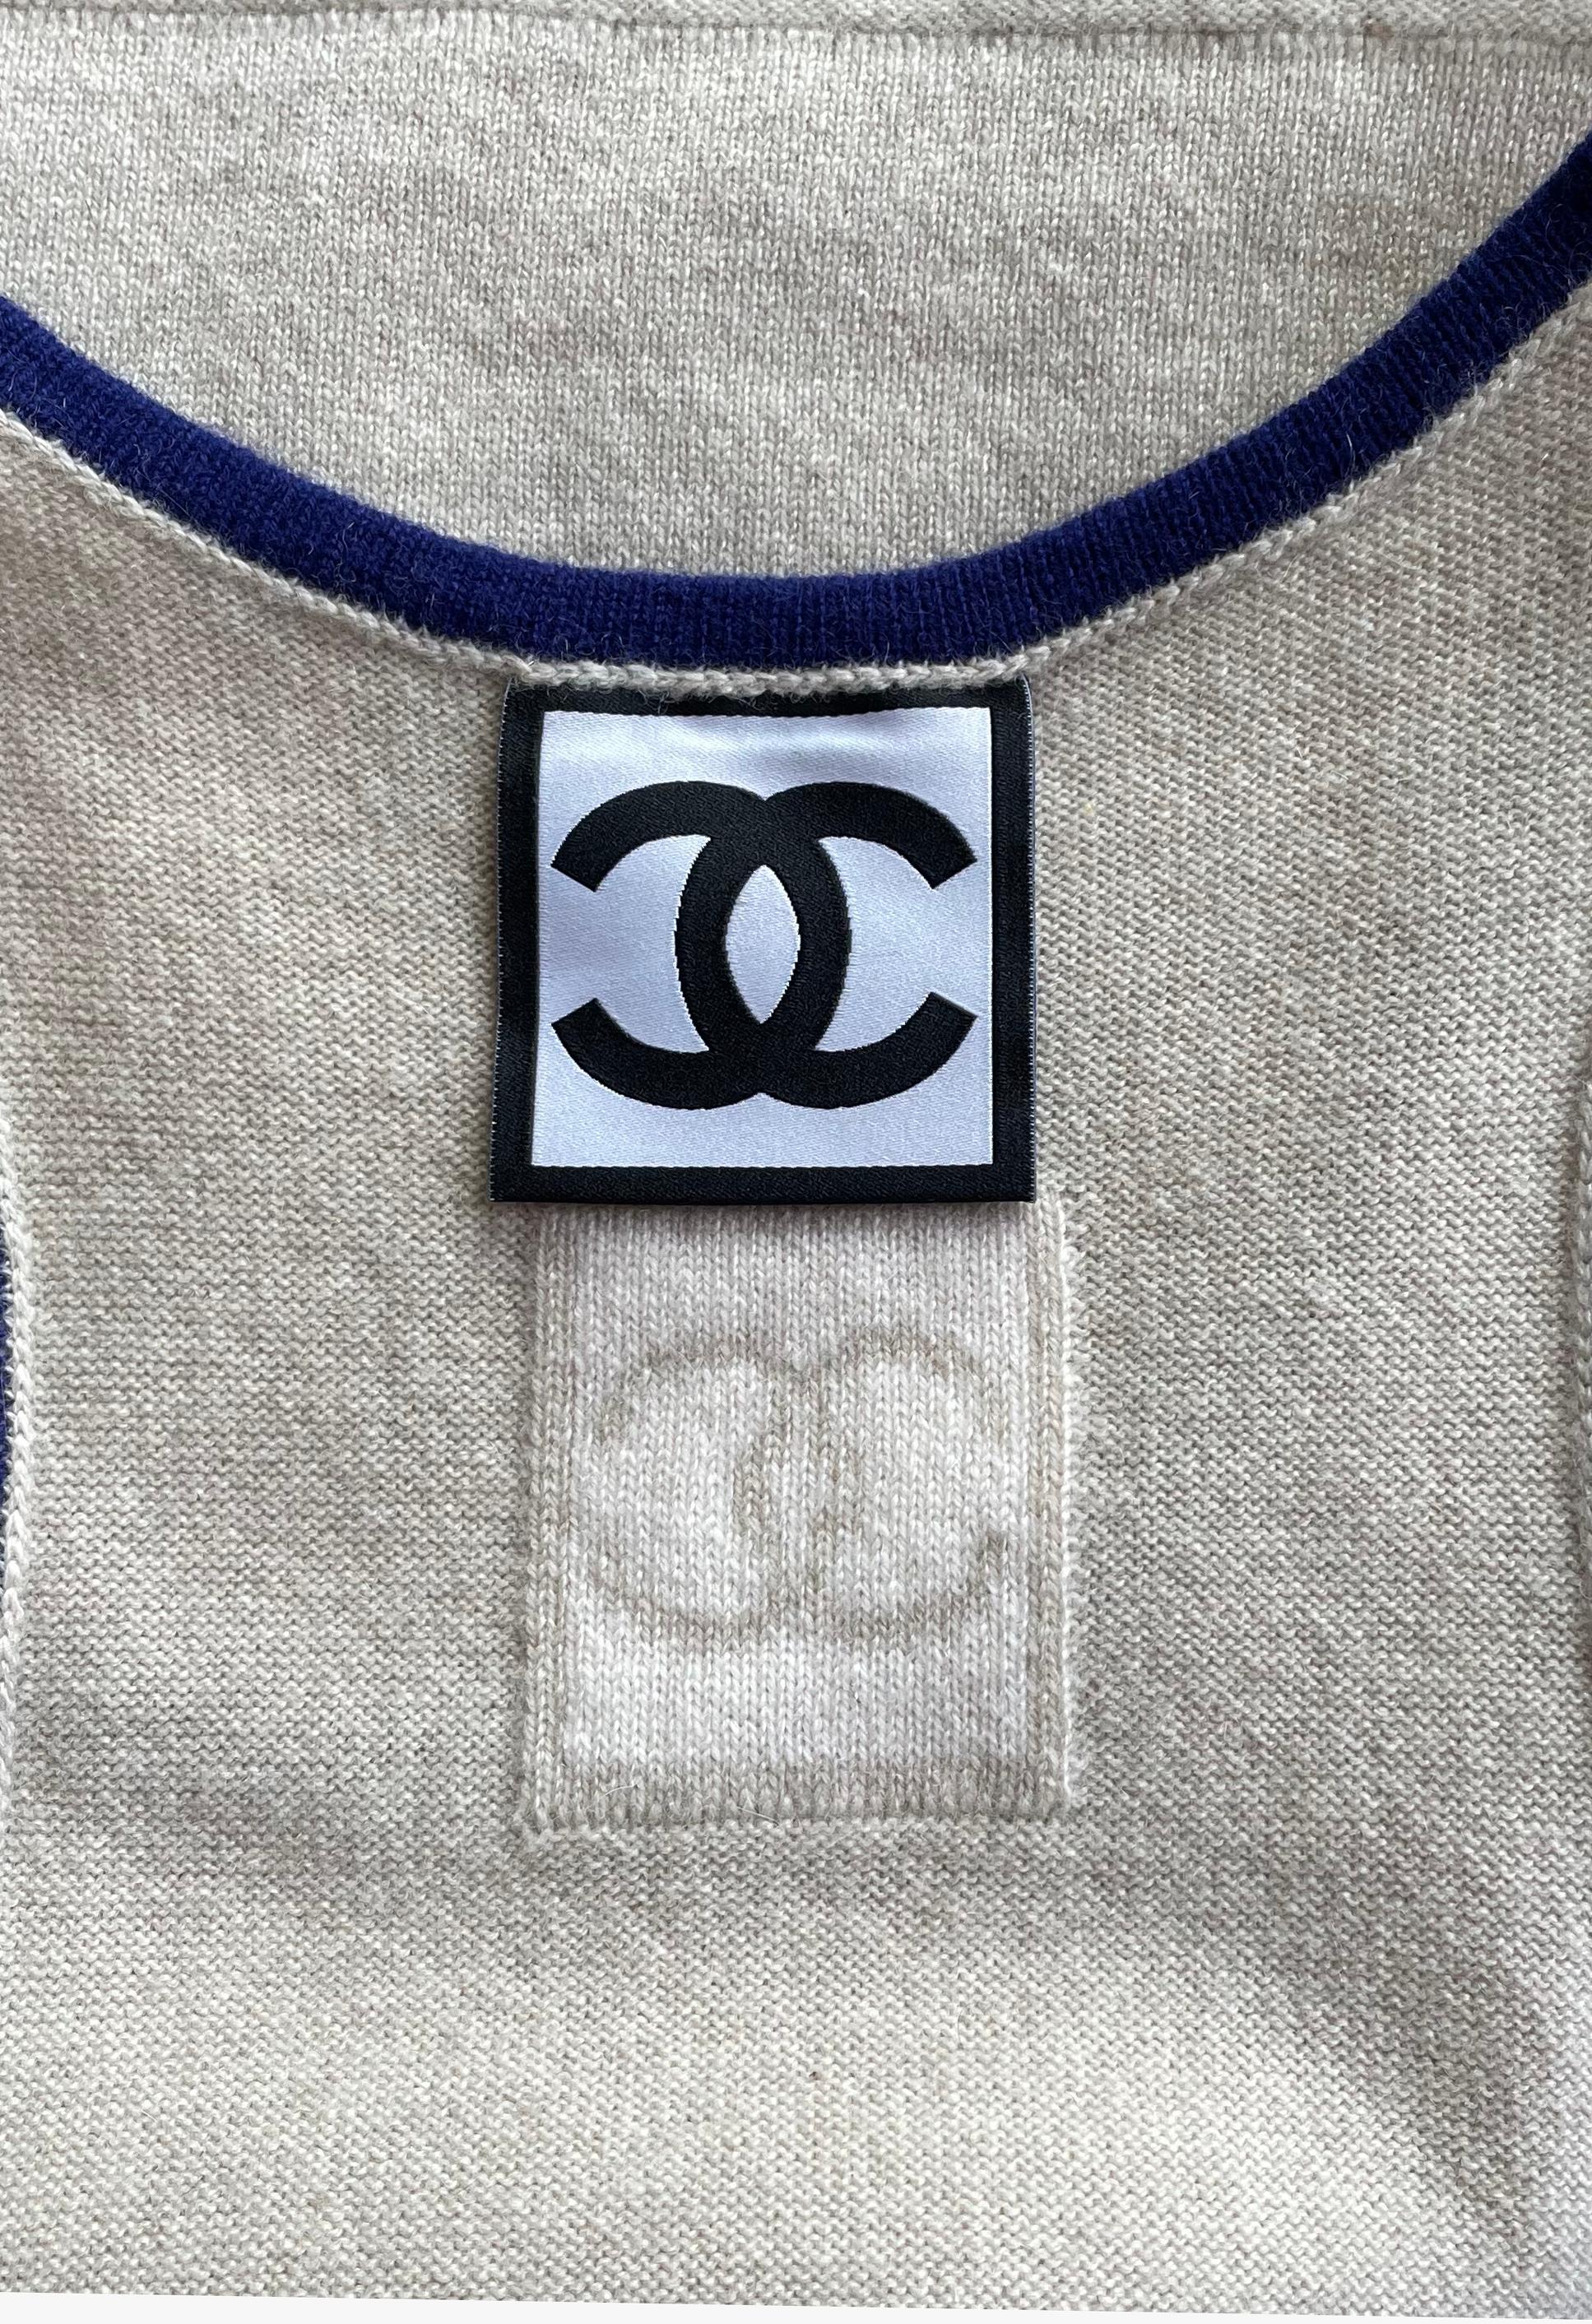 Chanel sand cashmere tank kangaroo pocket dress with blue piping, 2010s For Sale 1